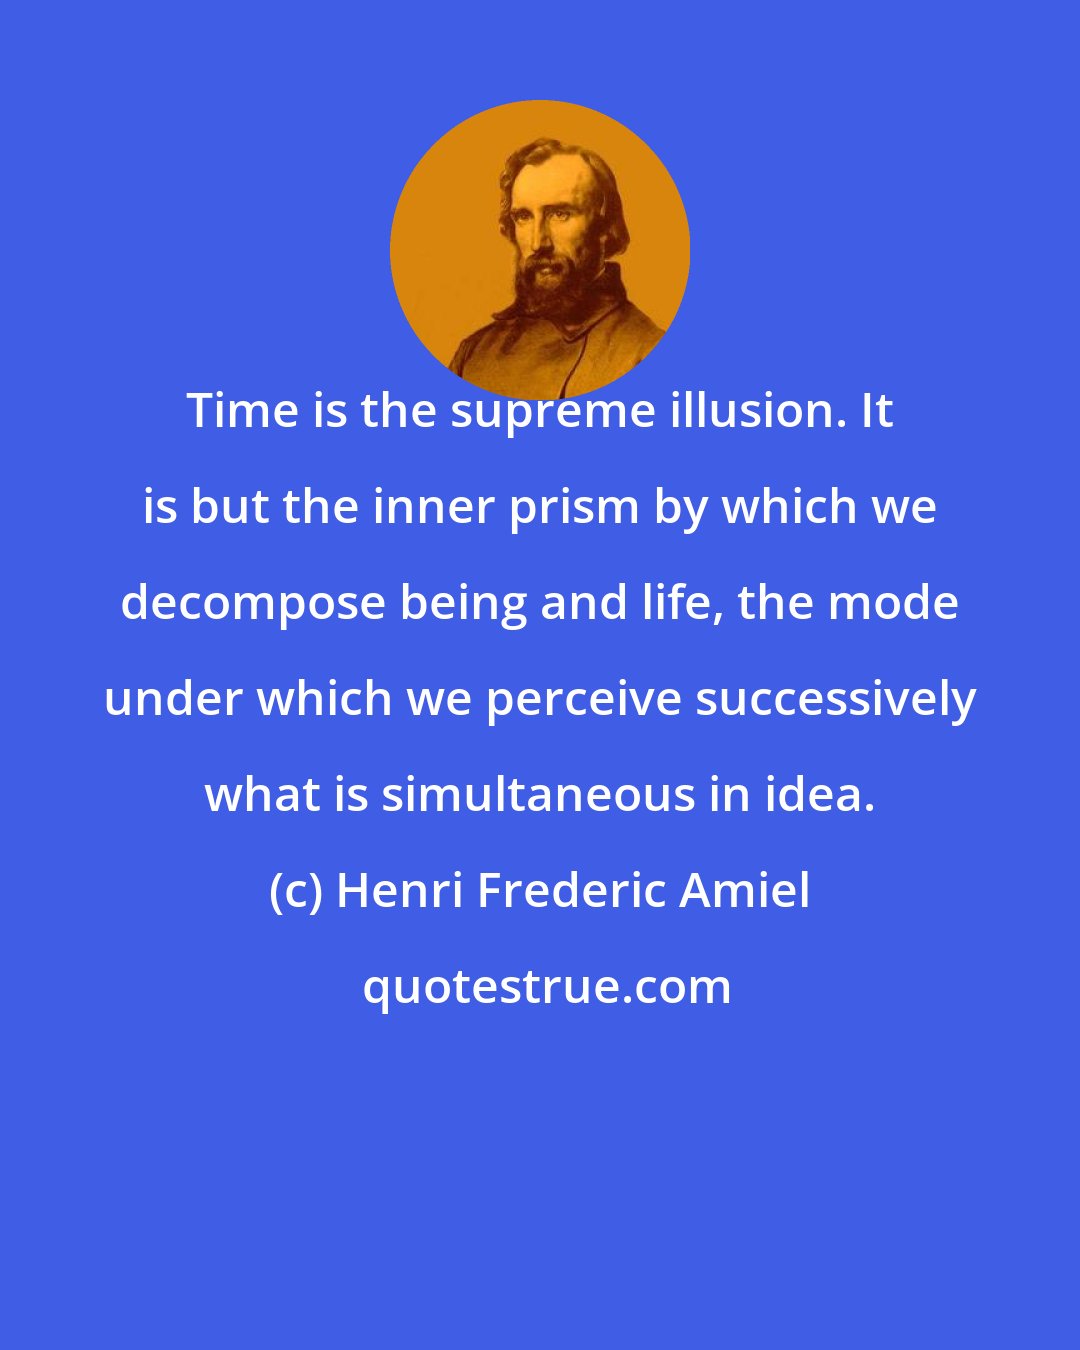 Henri Frederic Amiel: Time is the supreme illusion. It is but the inner prism by which we decompose being and life, the mode under which we perceive successively what is simultaneous in idea.